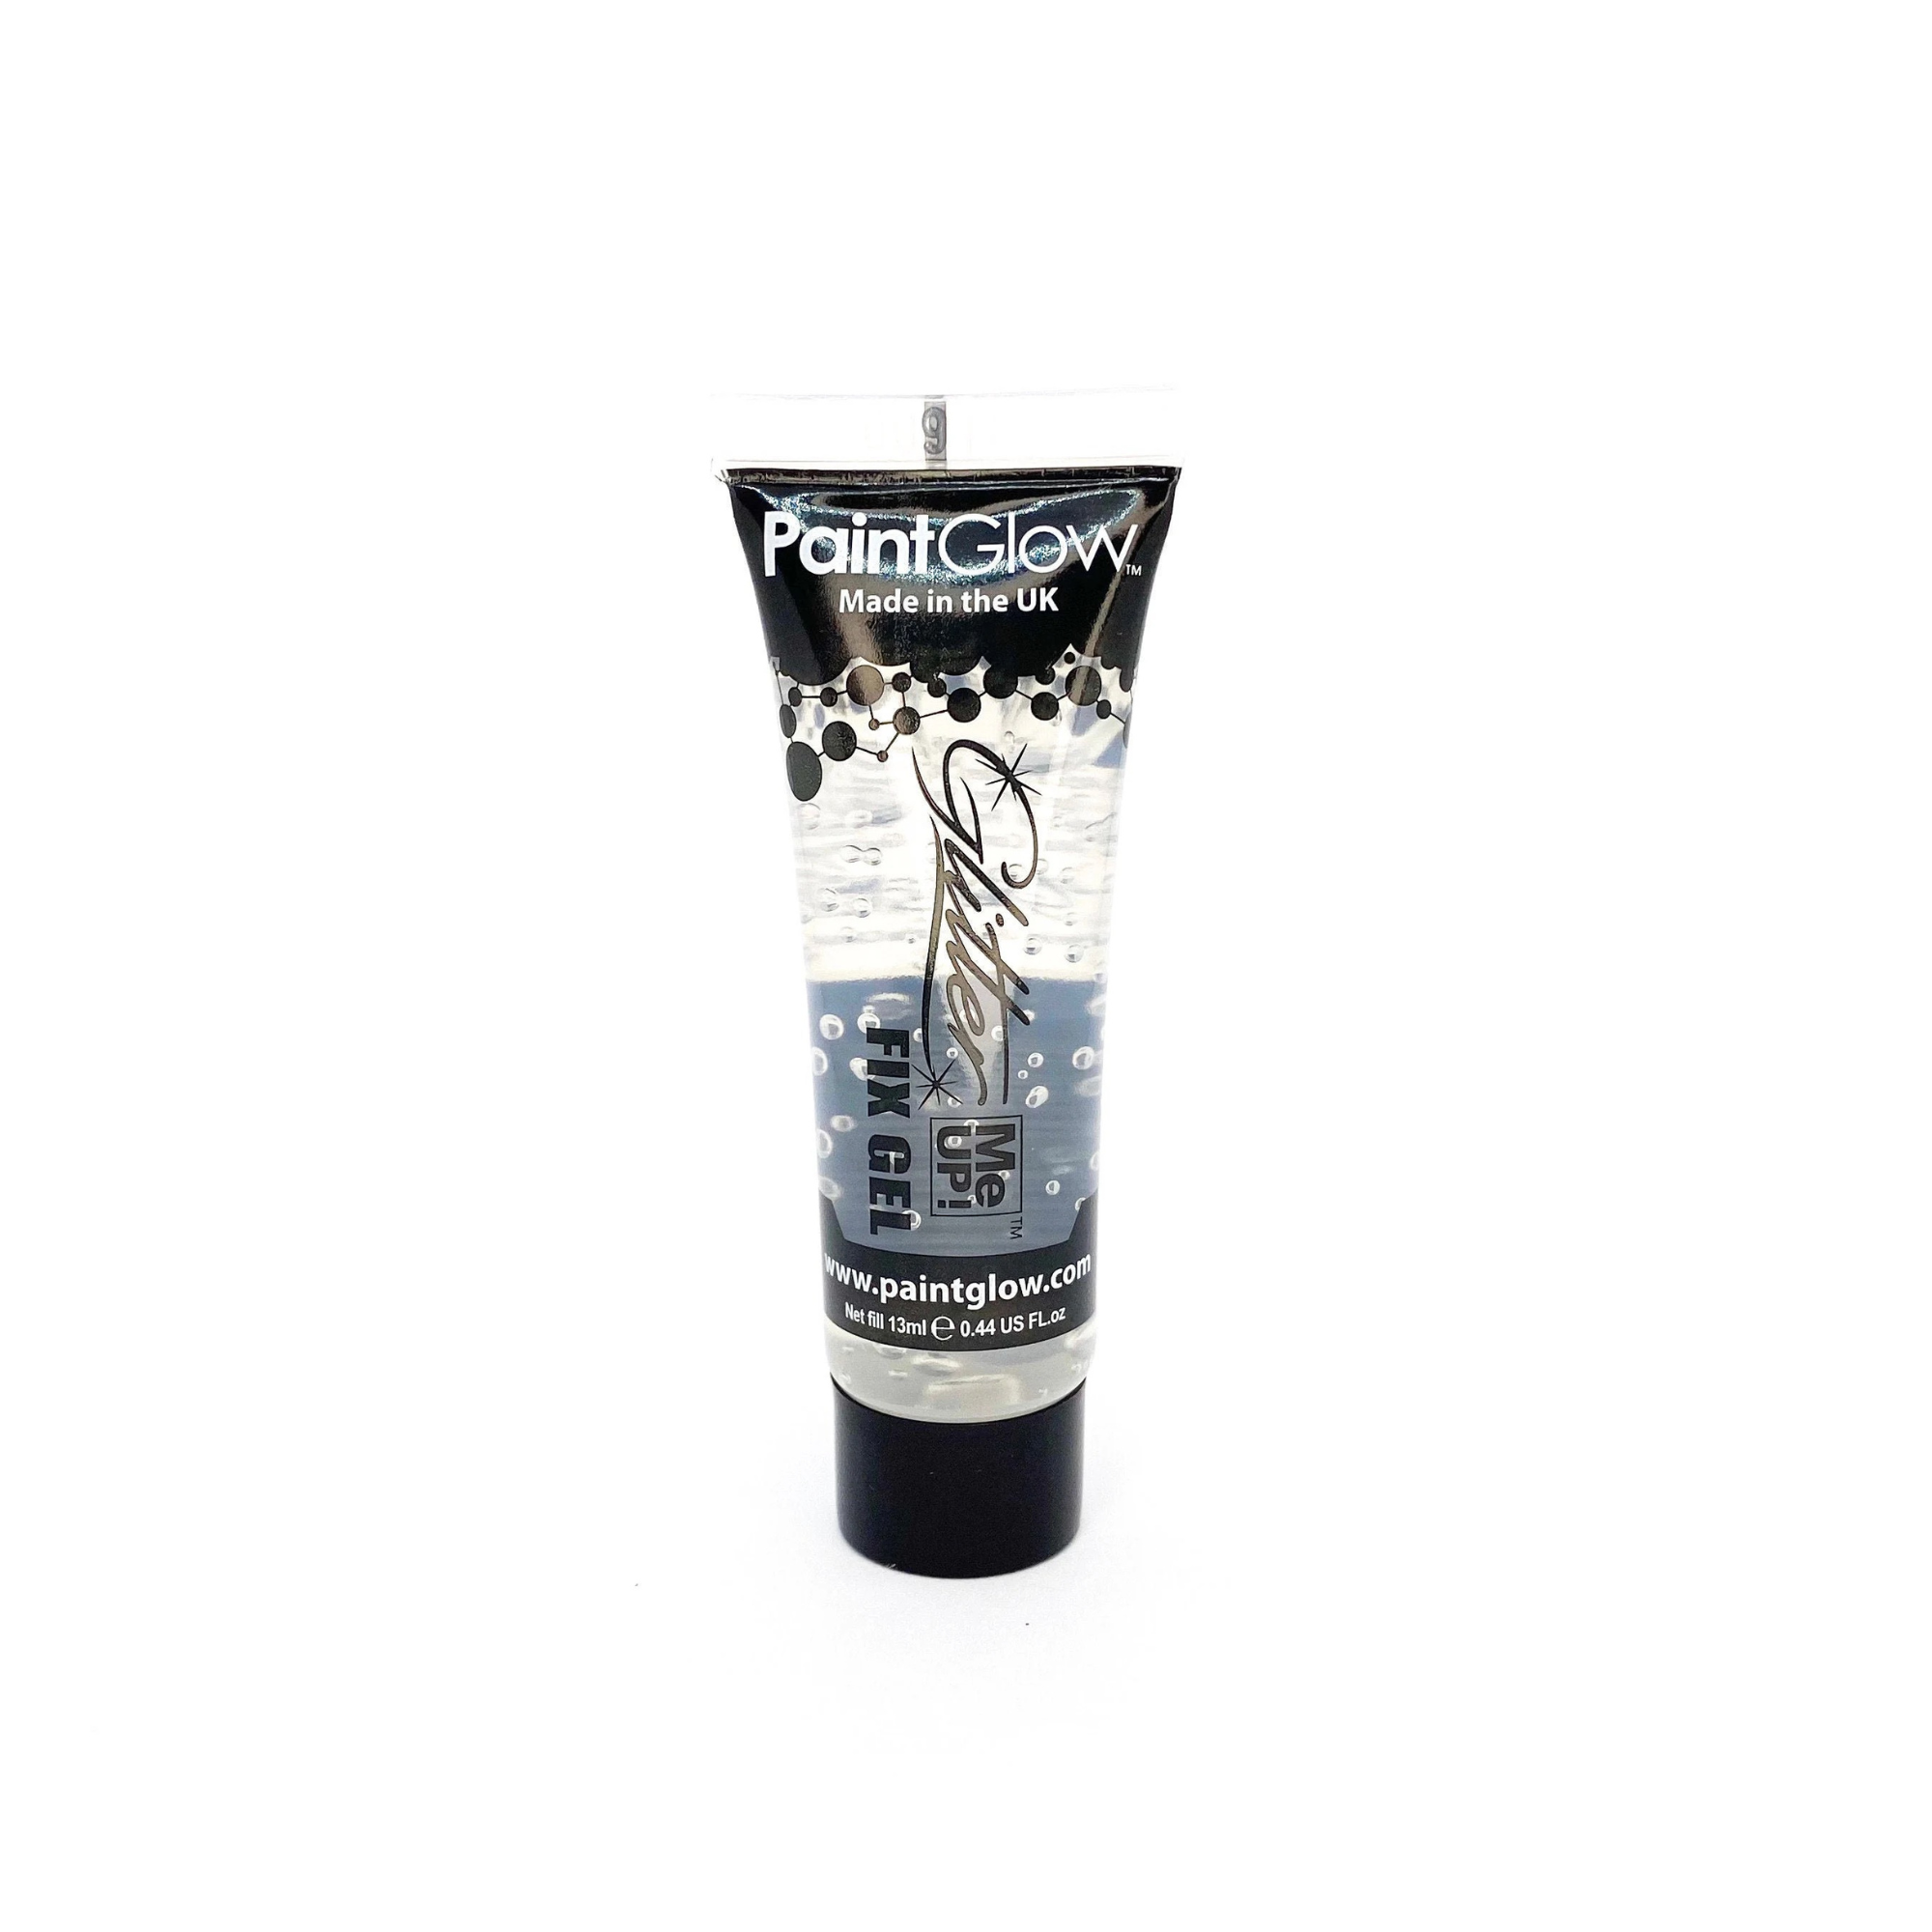 Paintglow glitter fix gel; a slightly stronger hold for applying your cosmetic glitter